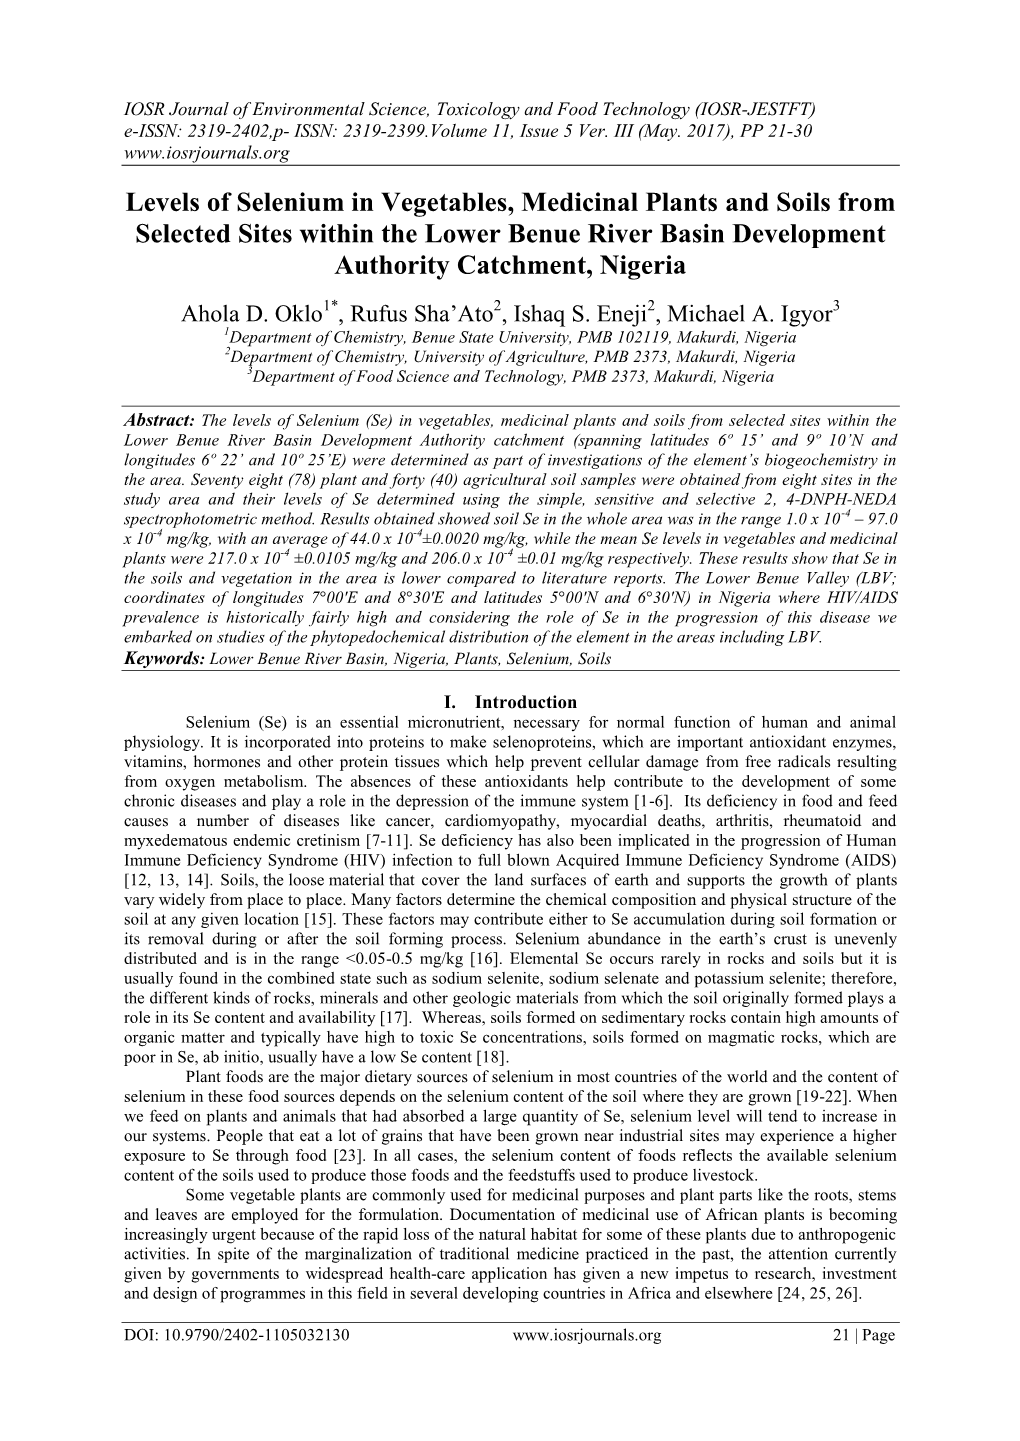 Levels of Selenium in Vegetables, Medicinal Plants and Soils from Selected Sites Within the Lower Benue River Basin Development Authority Catchment, Nigeria